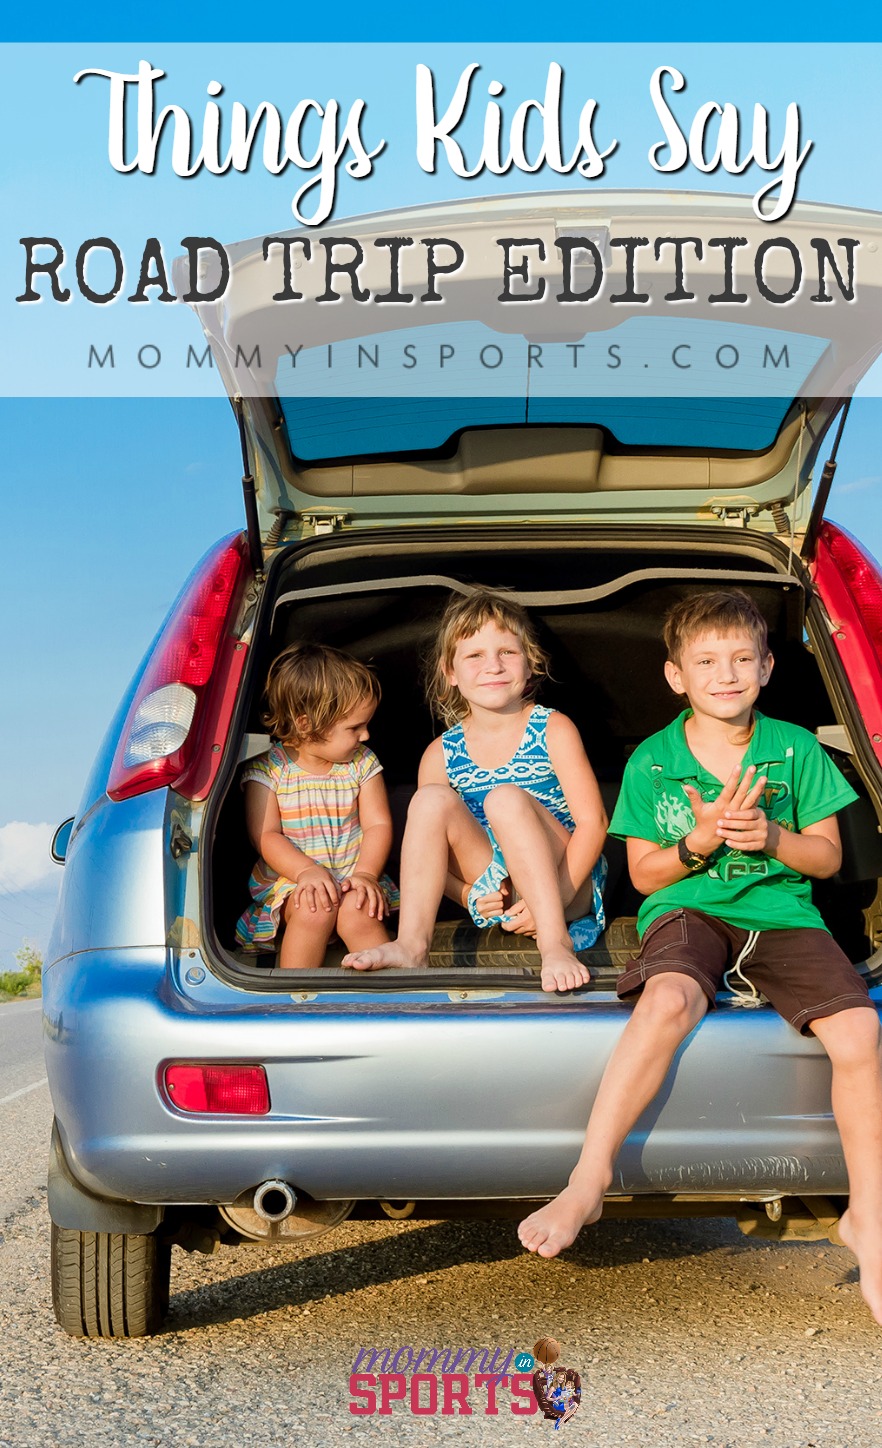 Heading out on a road trip with kids? They always make things interesting and hilarious! Check out these THINGS KIDS SAY: ROAD TRIP EDITION!